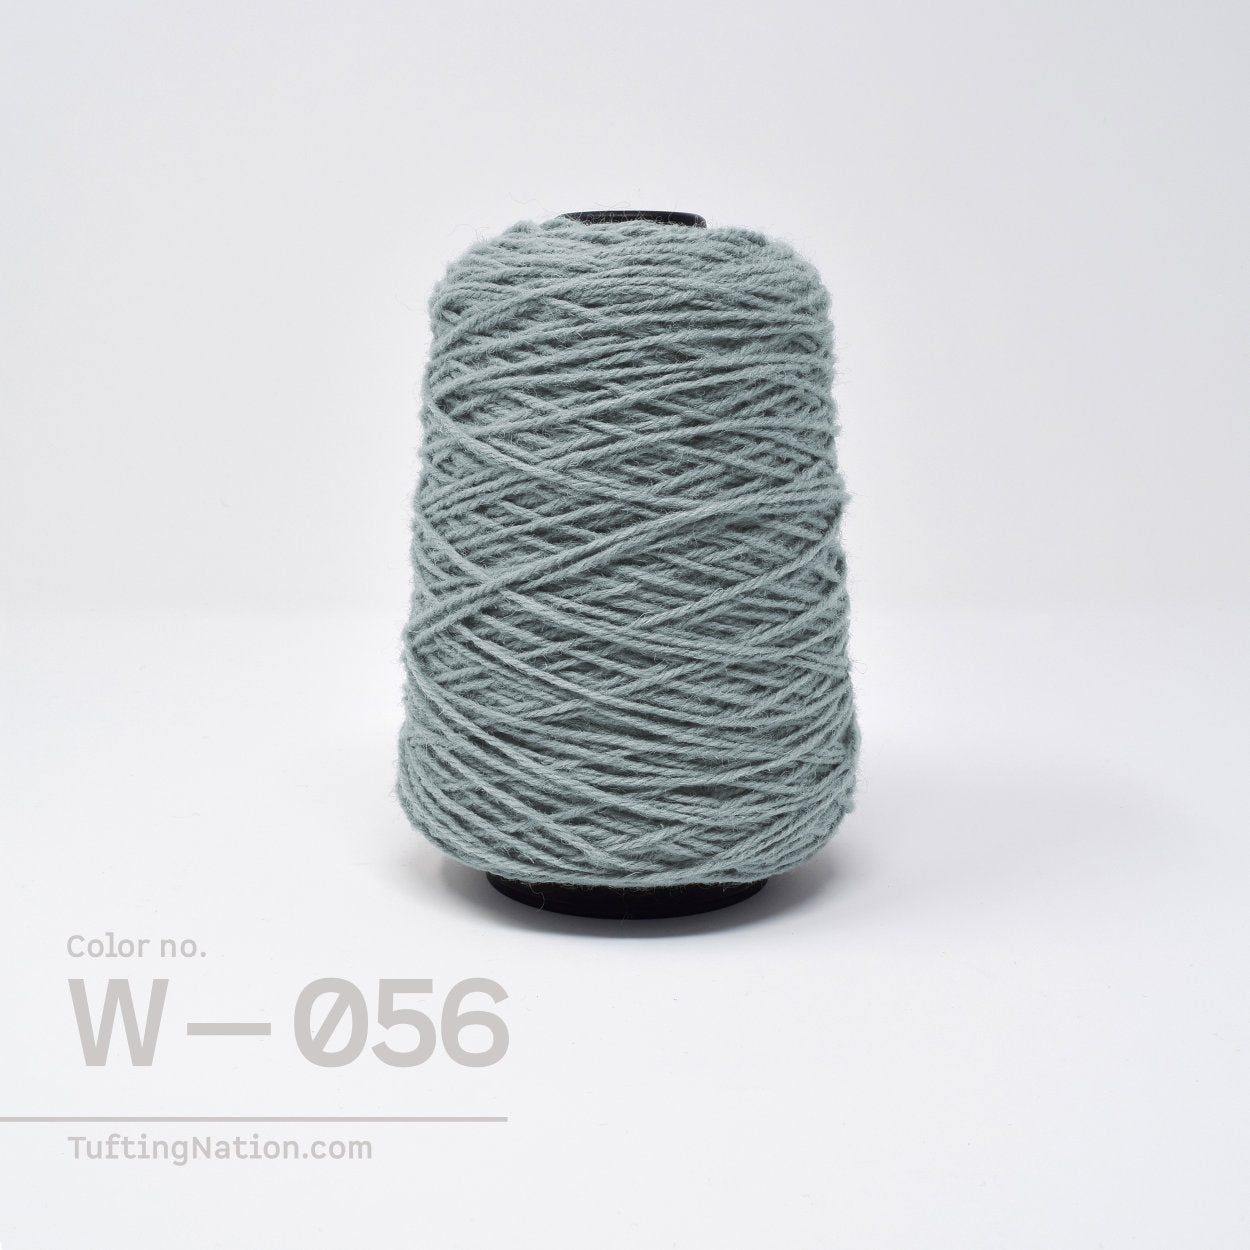 Best Wool Rug Yarn for Tifting Gun and Tapestry Weaving | TuftingNation